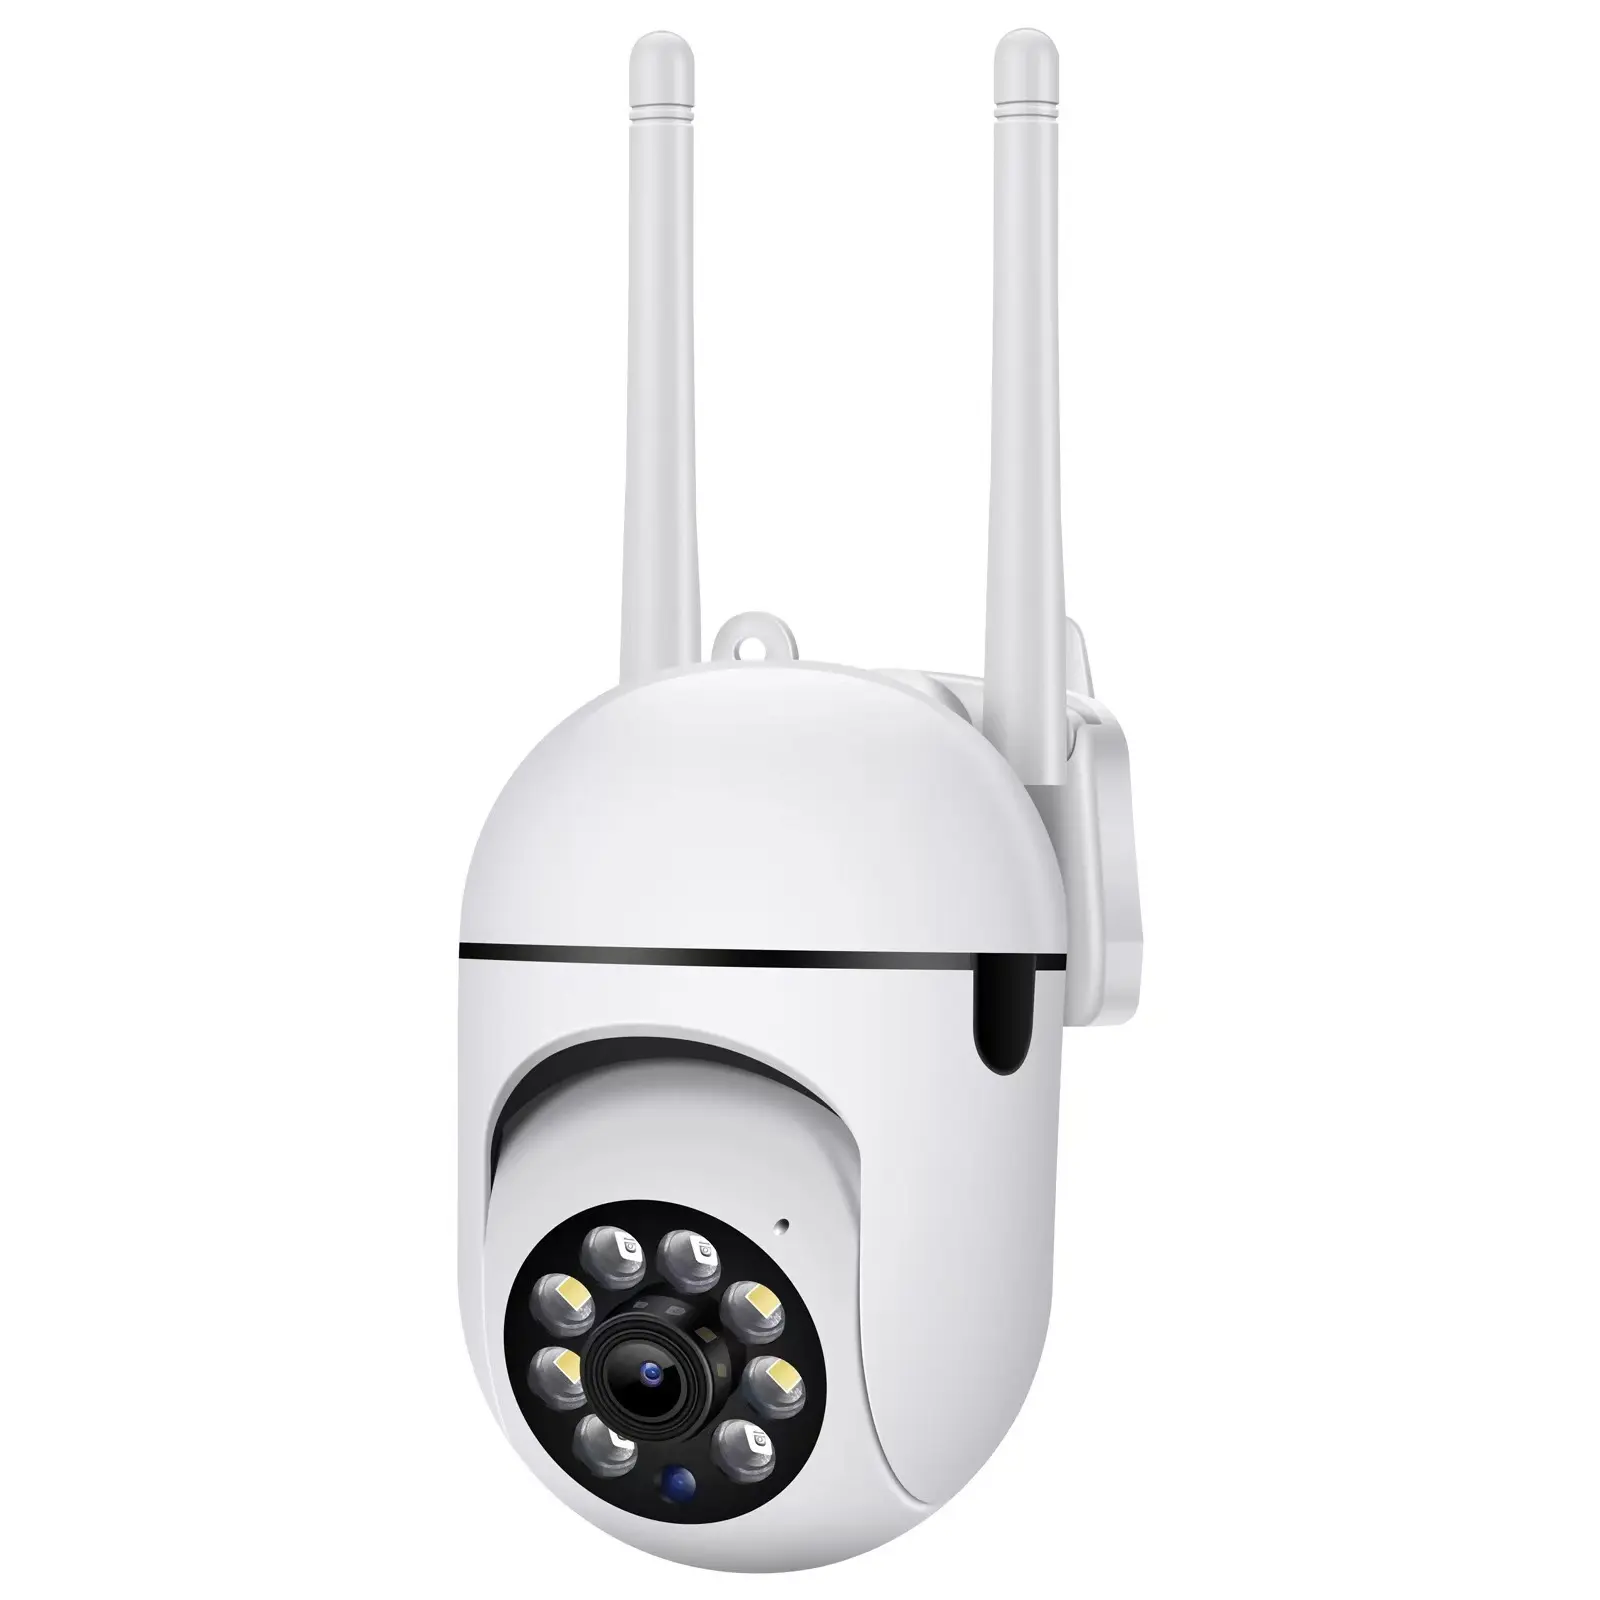 A7 Surveillance Alarm Wireless Camera With Night Vision and Motion Detection, Cloud Storage,Zoom Camera